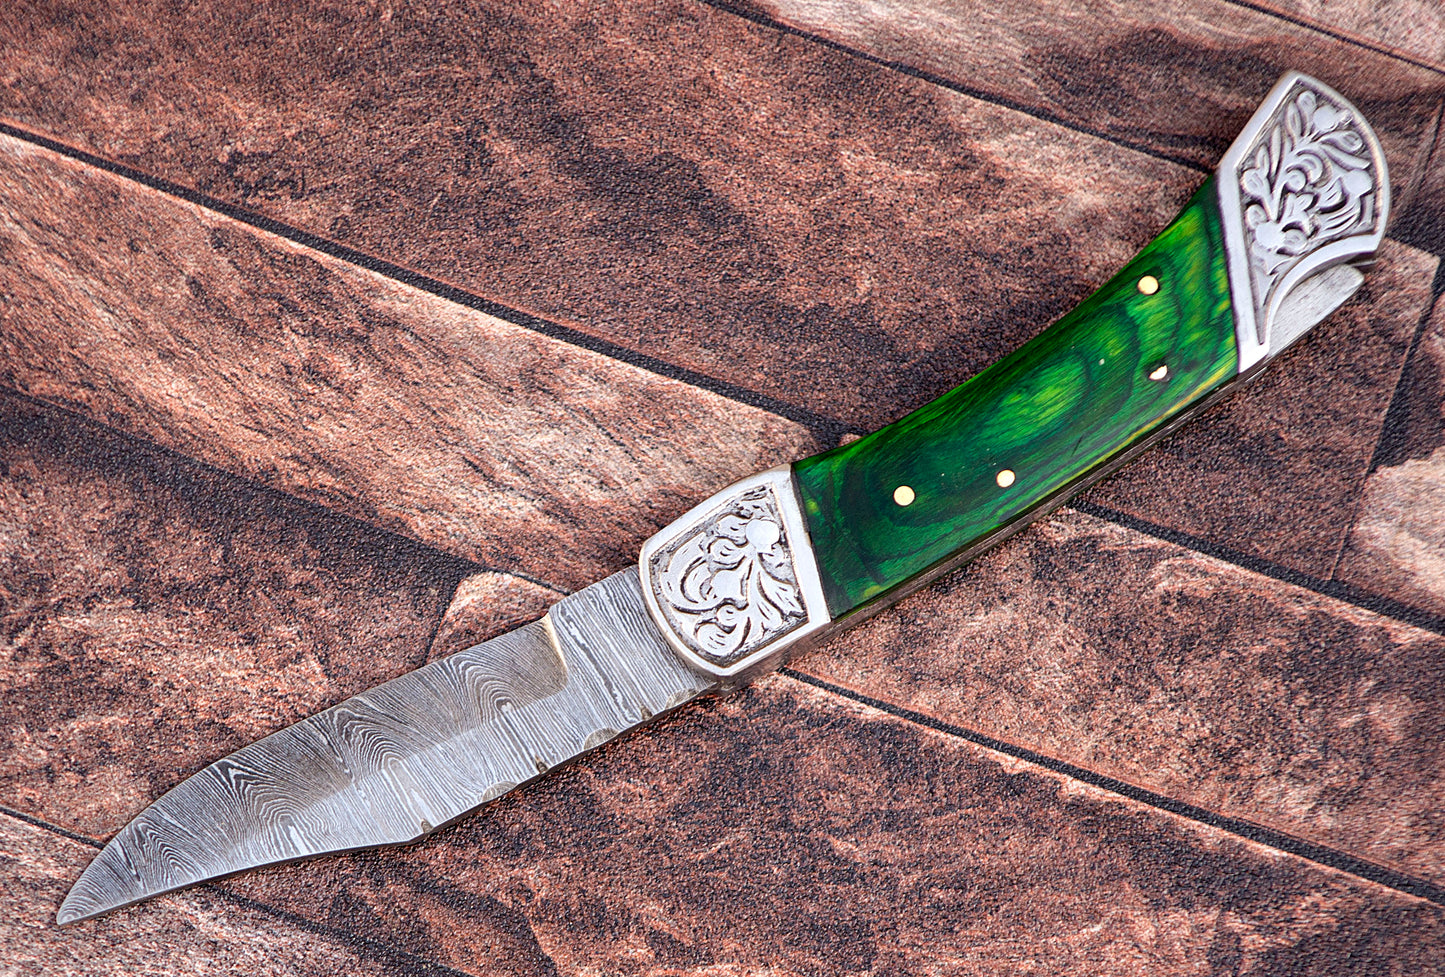 9" long back lock Folding Knife, Green wood Scale with Engraved steel bolster, custom made 4" Hand Forged Damascus steel blade, Cow hide leather sheath with belt loop